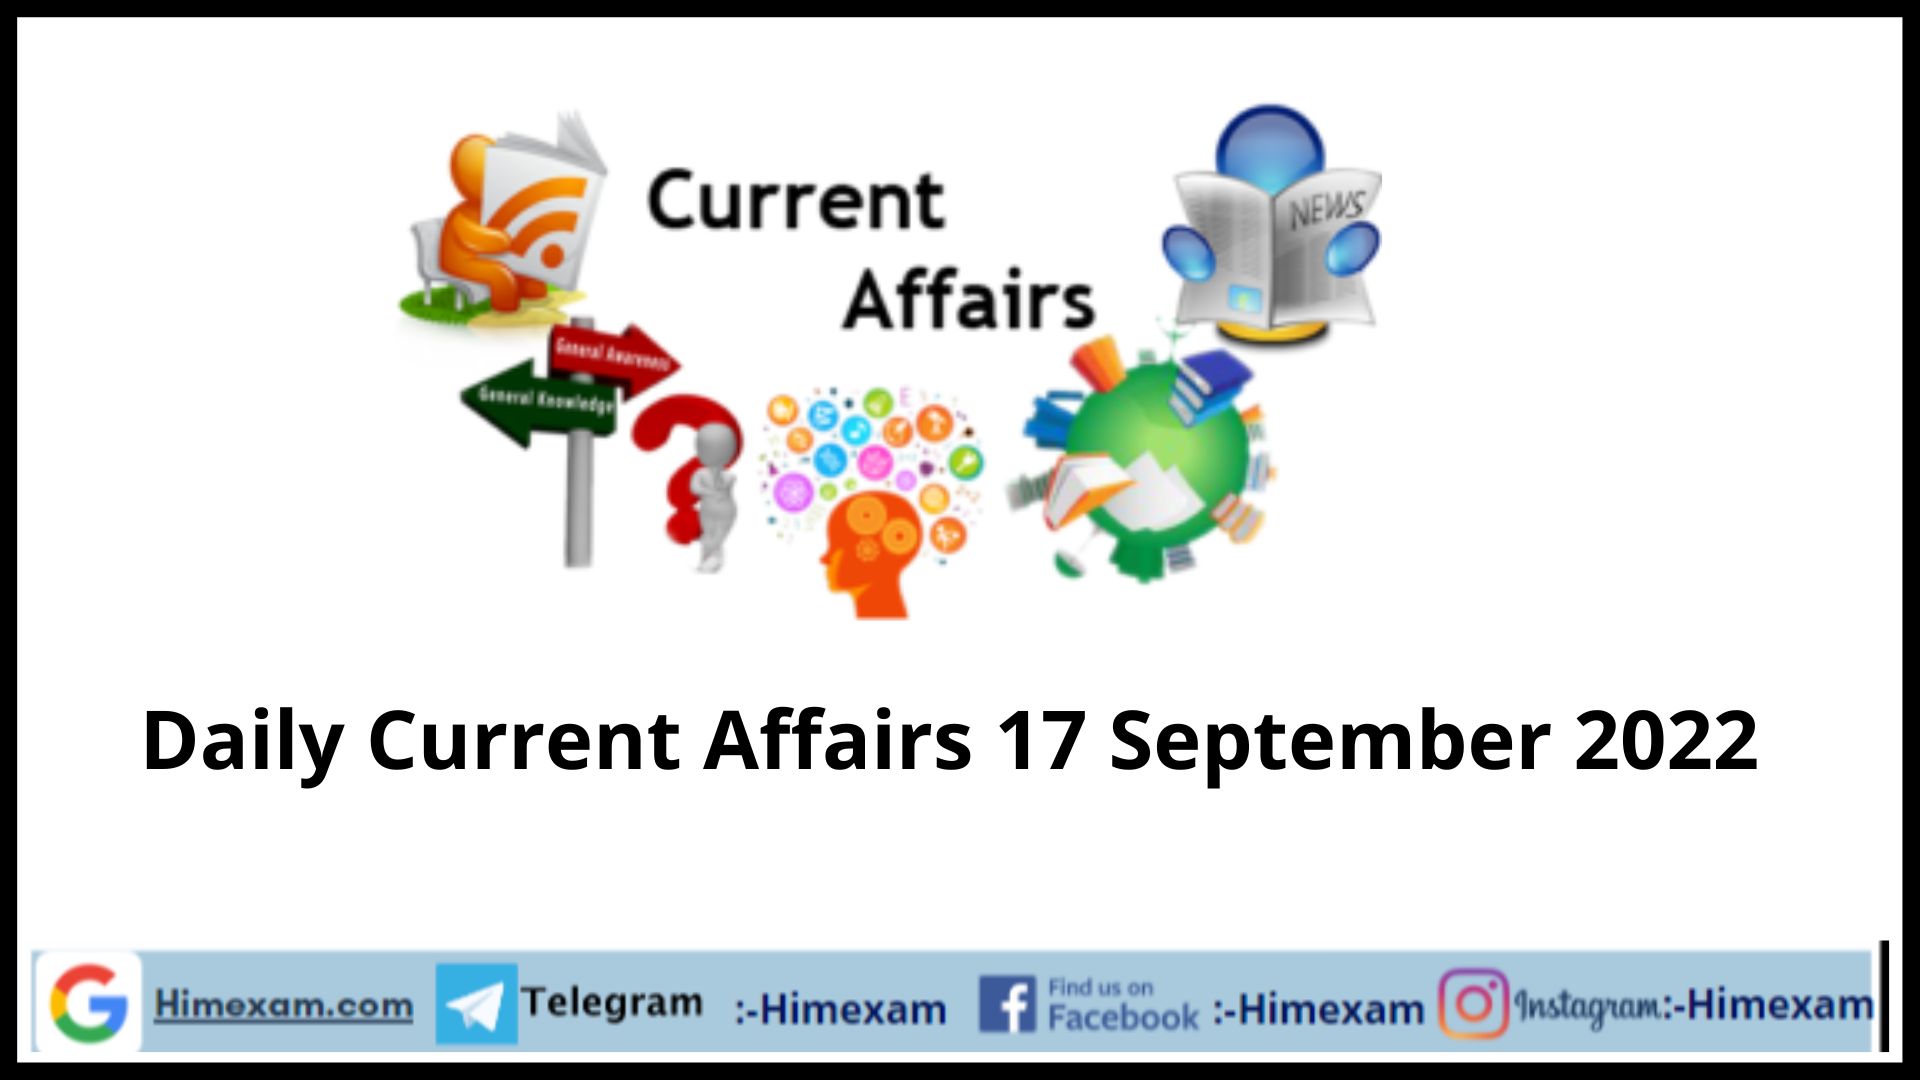 Daily Current Affairs 17 September 2022